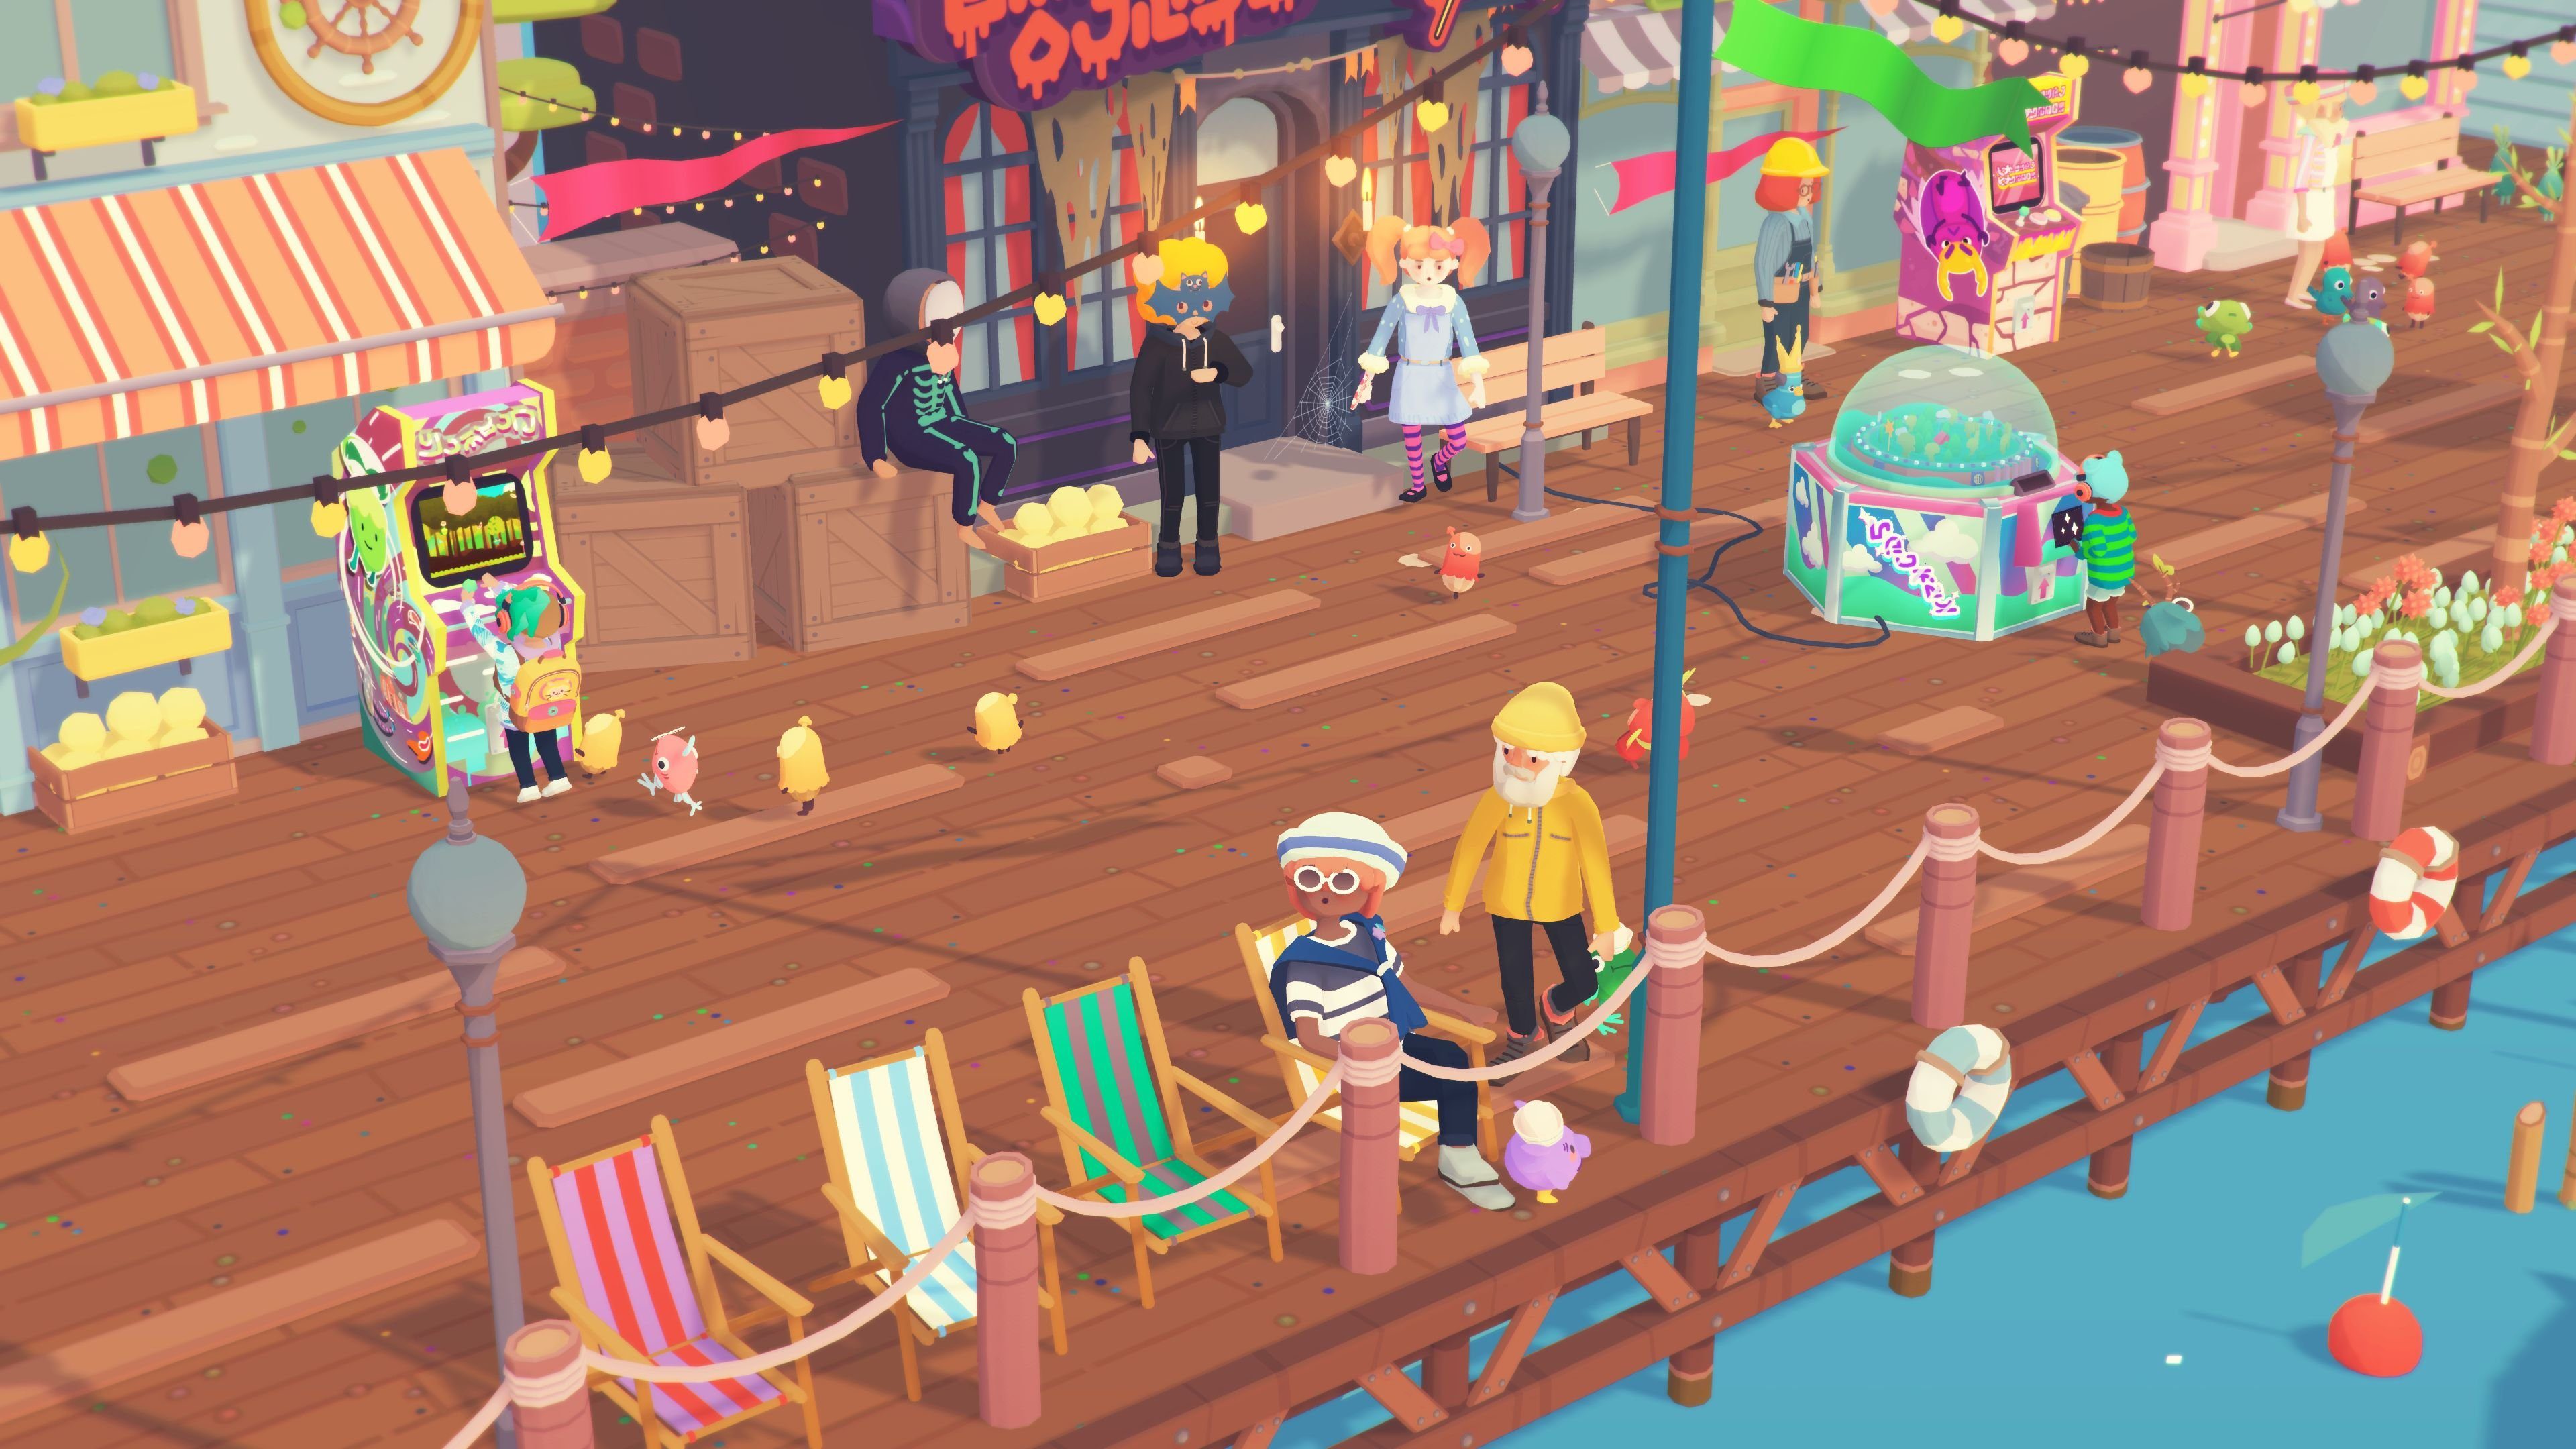 Switch Nintendo Ooblets